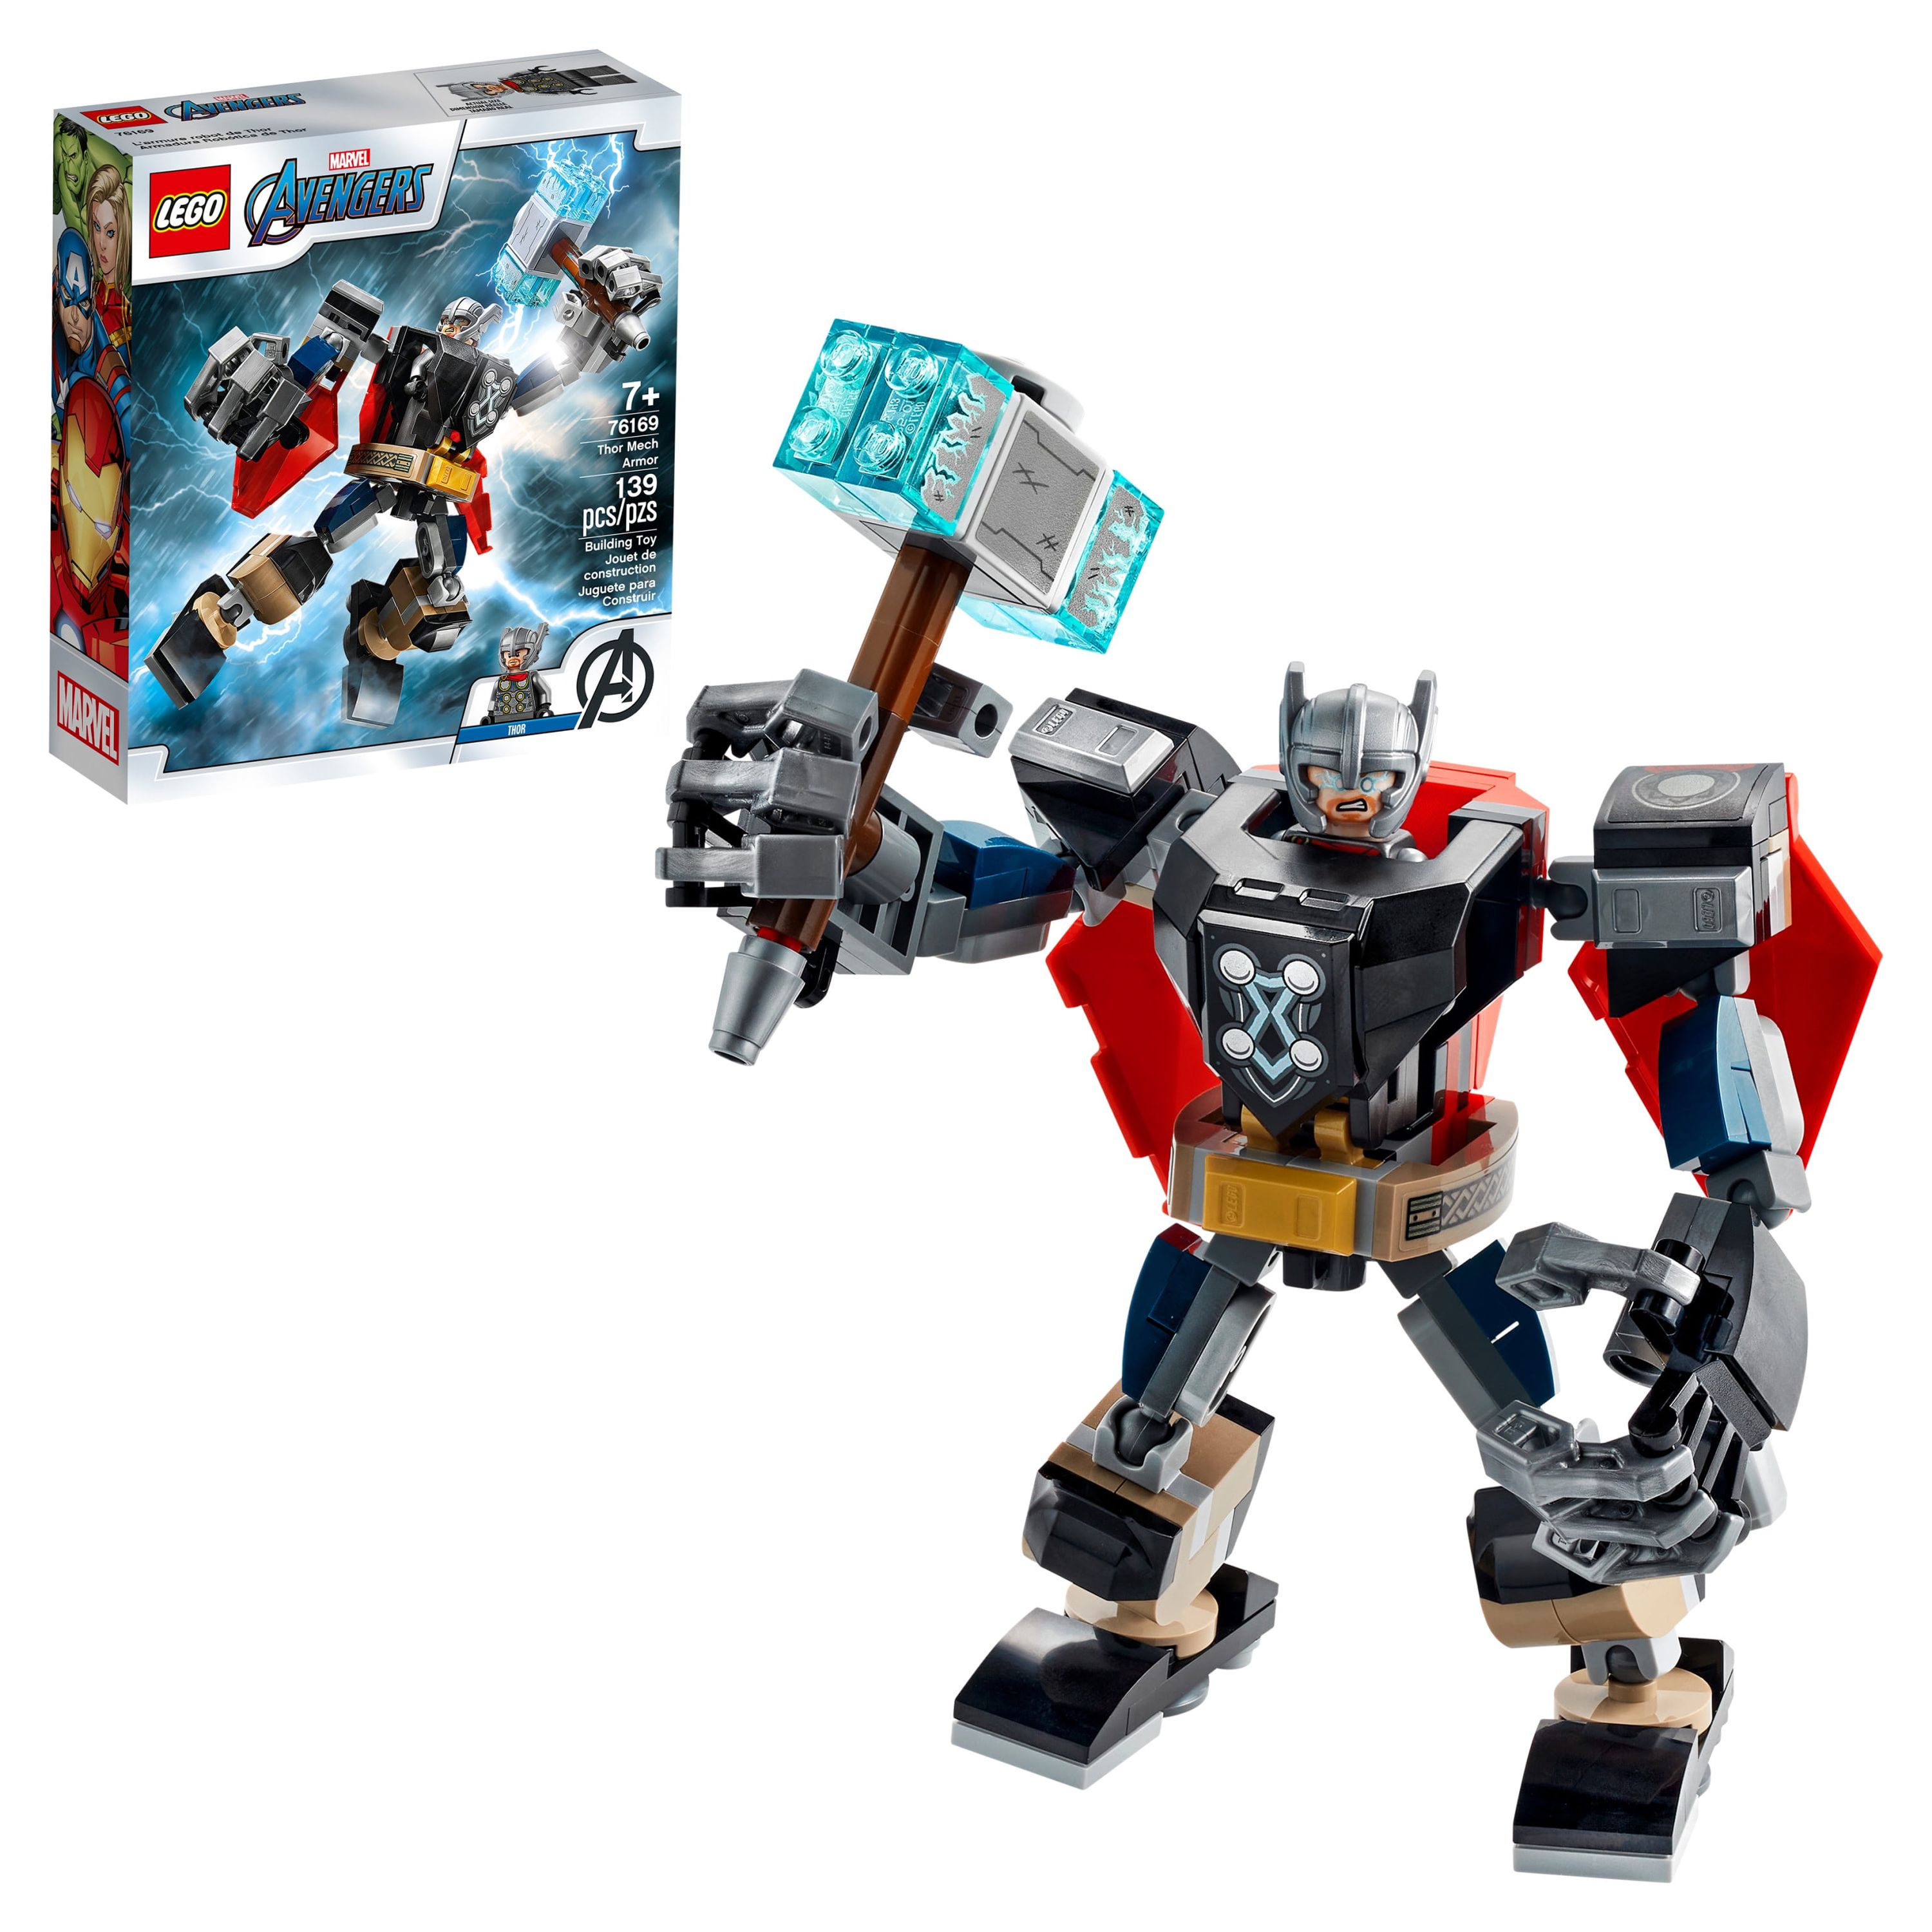 LEGO Marvel Avengers Classic Thor Mech Armor 76169 Cool Thor Hammer Playset (139 Pieces) - image 1 of 8